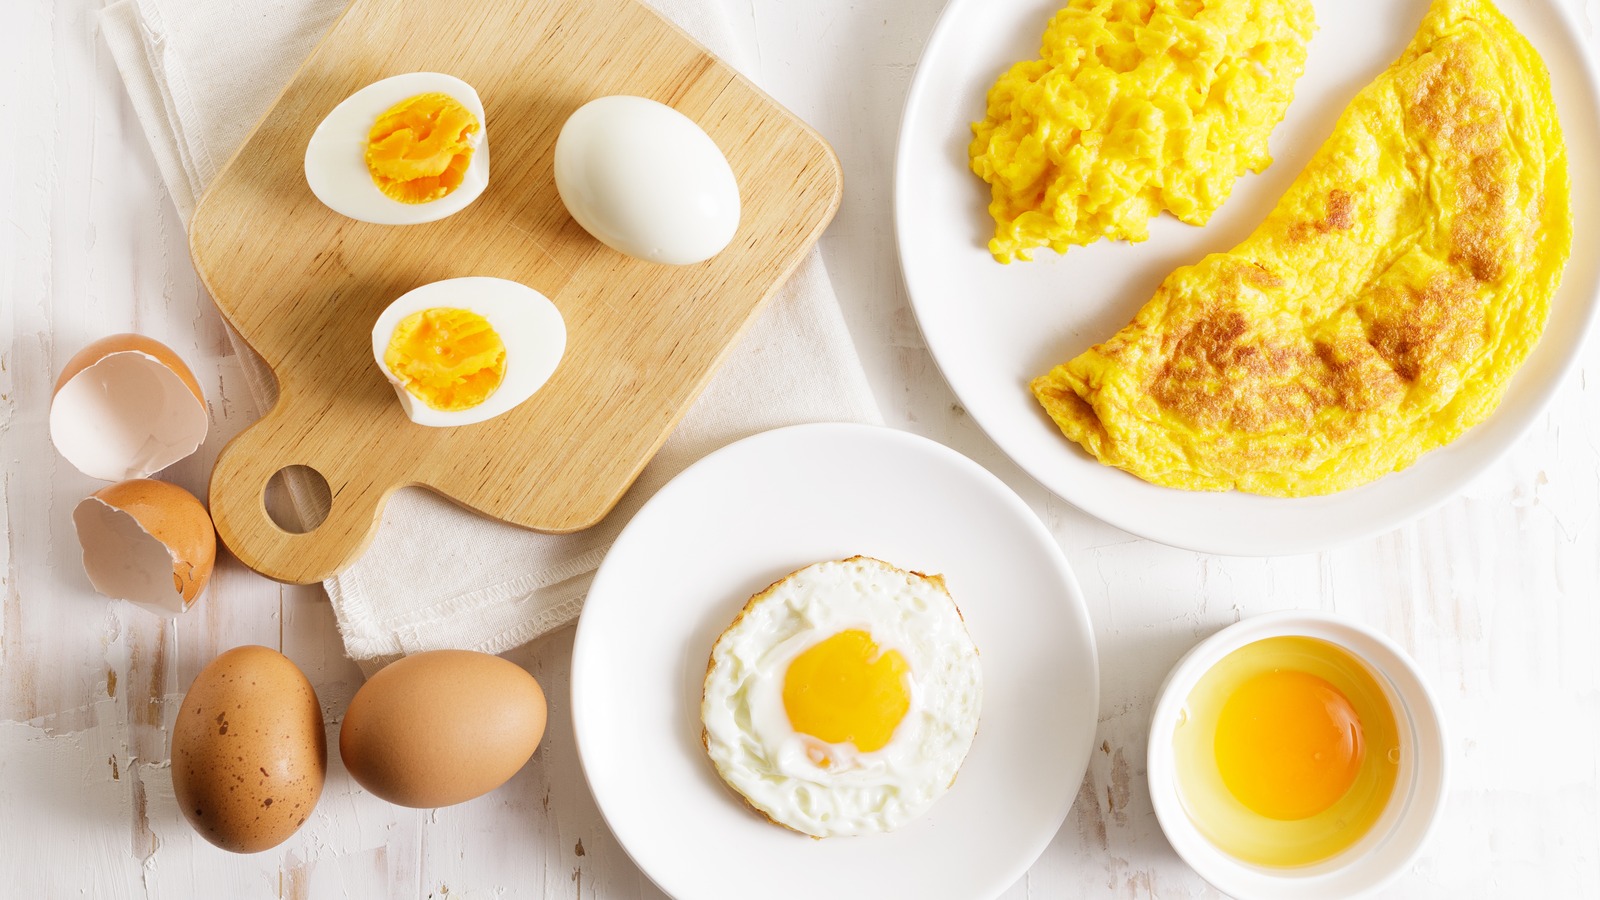 https://www.thedailymeal.com/img/gallery/15-creative-egg-gadgets-that-will-make-breakfast-way-more-fun/l-intro-1671134397.jpg